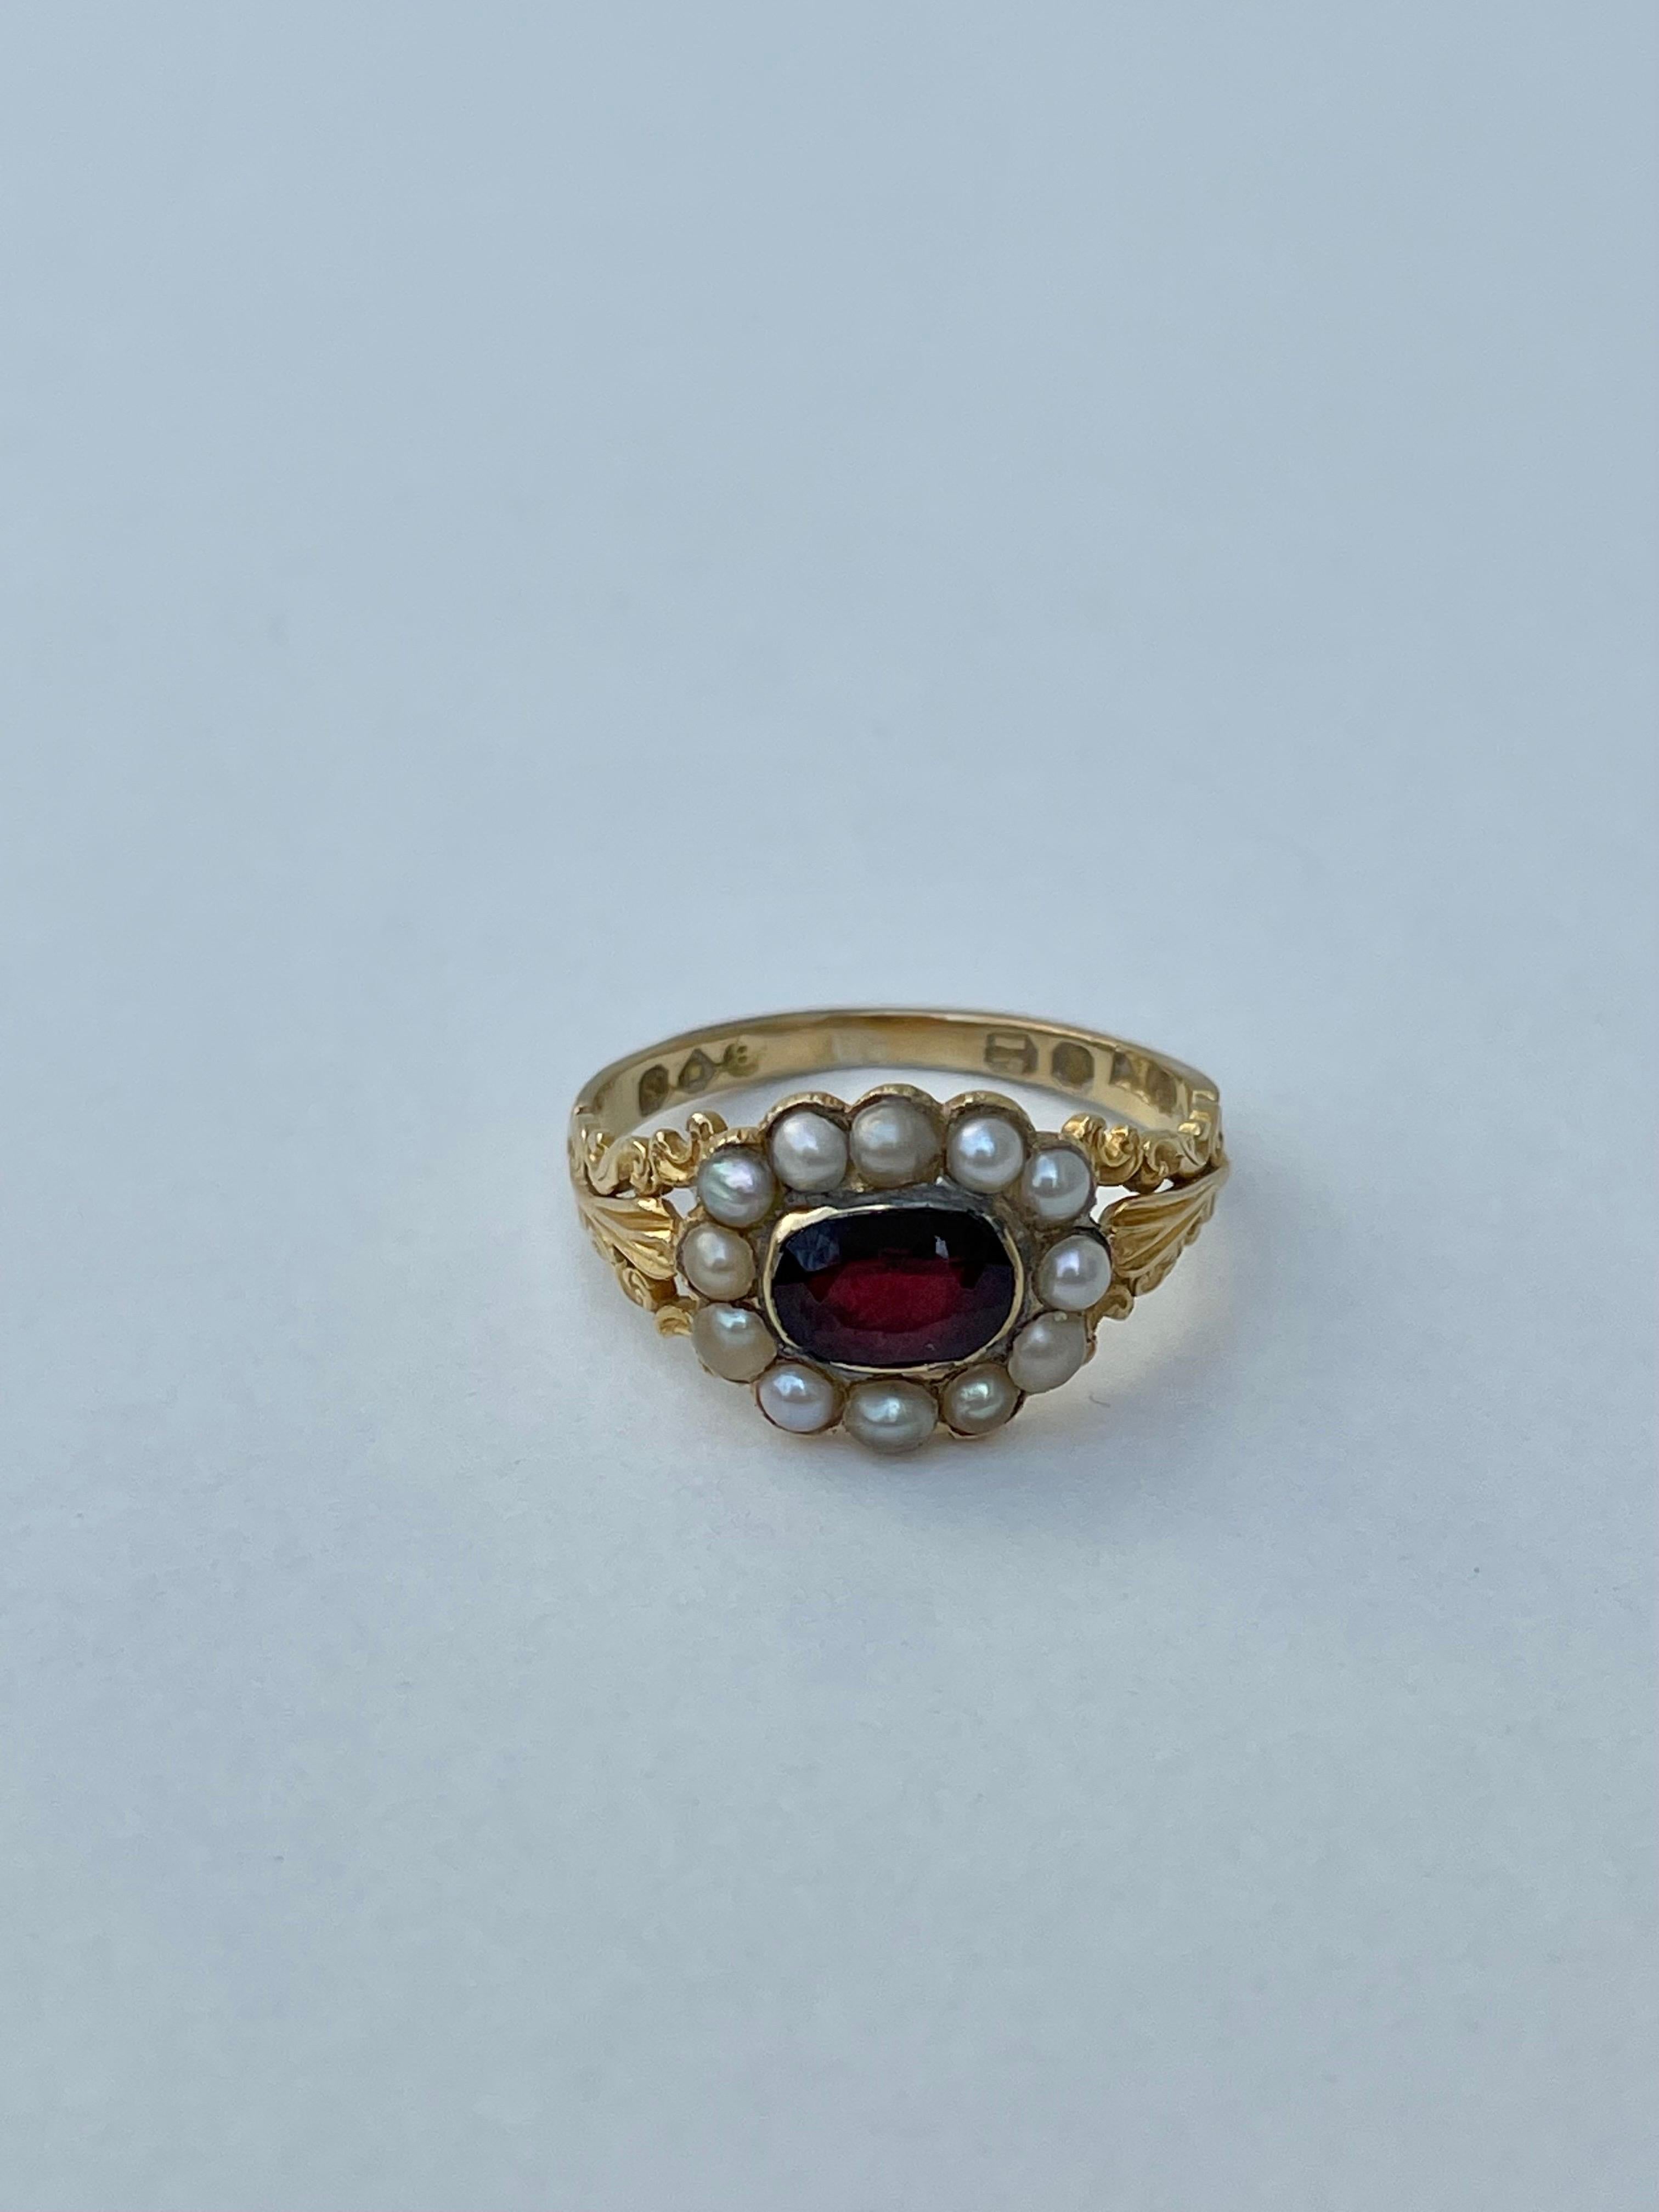 Antique Garnet and Pearl Halo 18ct Yellow Gold Ring 

the most prettiest detailed antique ring, gorgeous detailed shoulders 

The item comes without the box in the photos but will be presented in a gembank1973 gift box

Measurements: weight 3.74g,